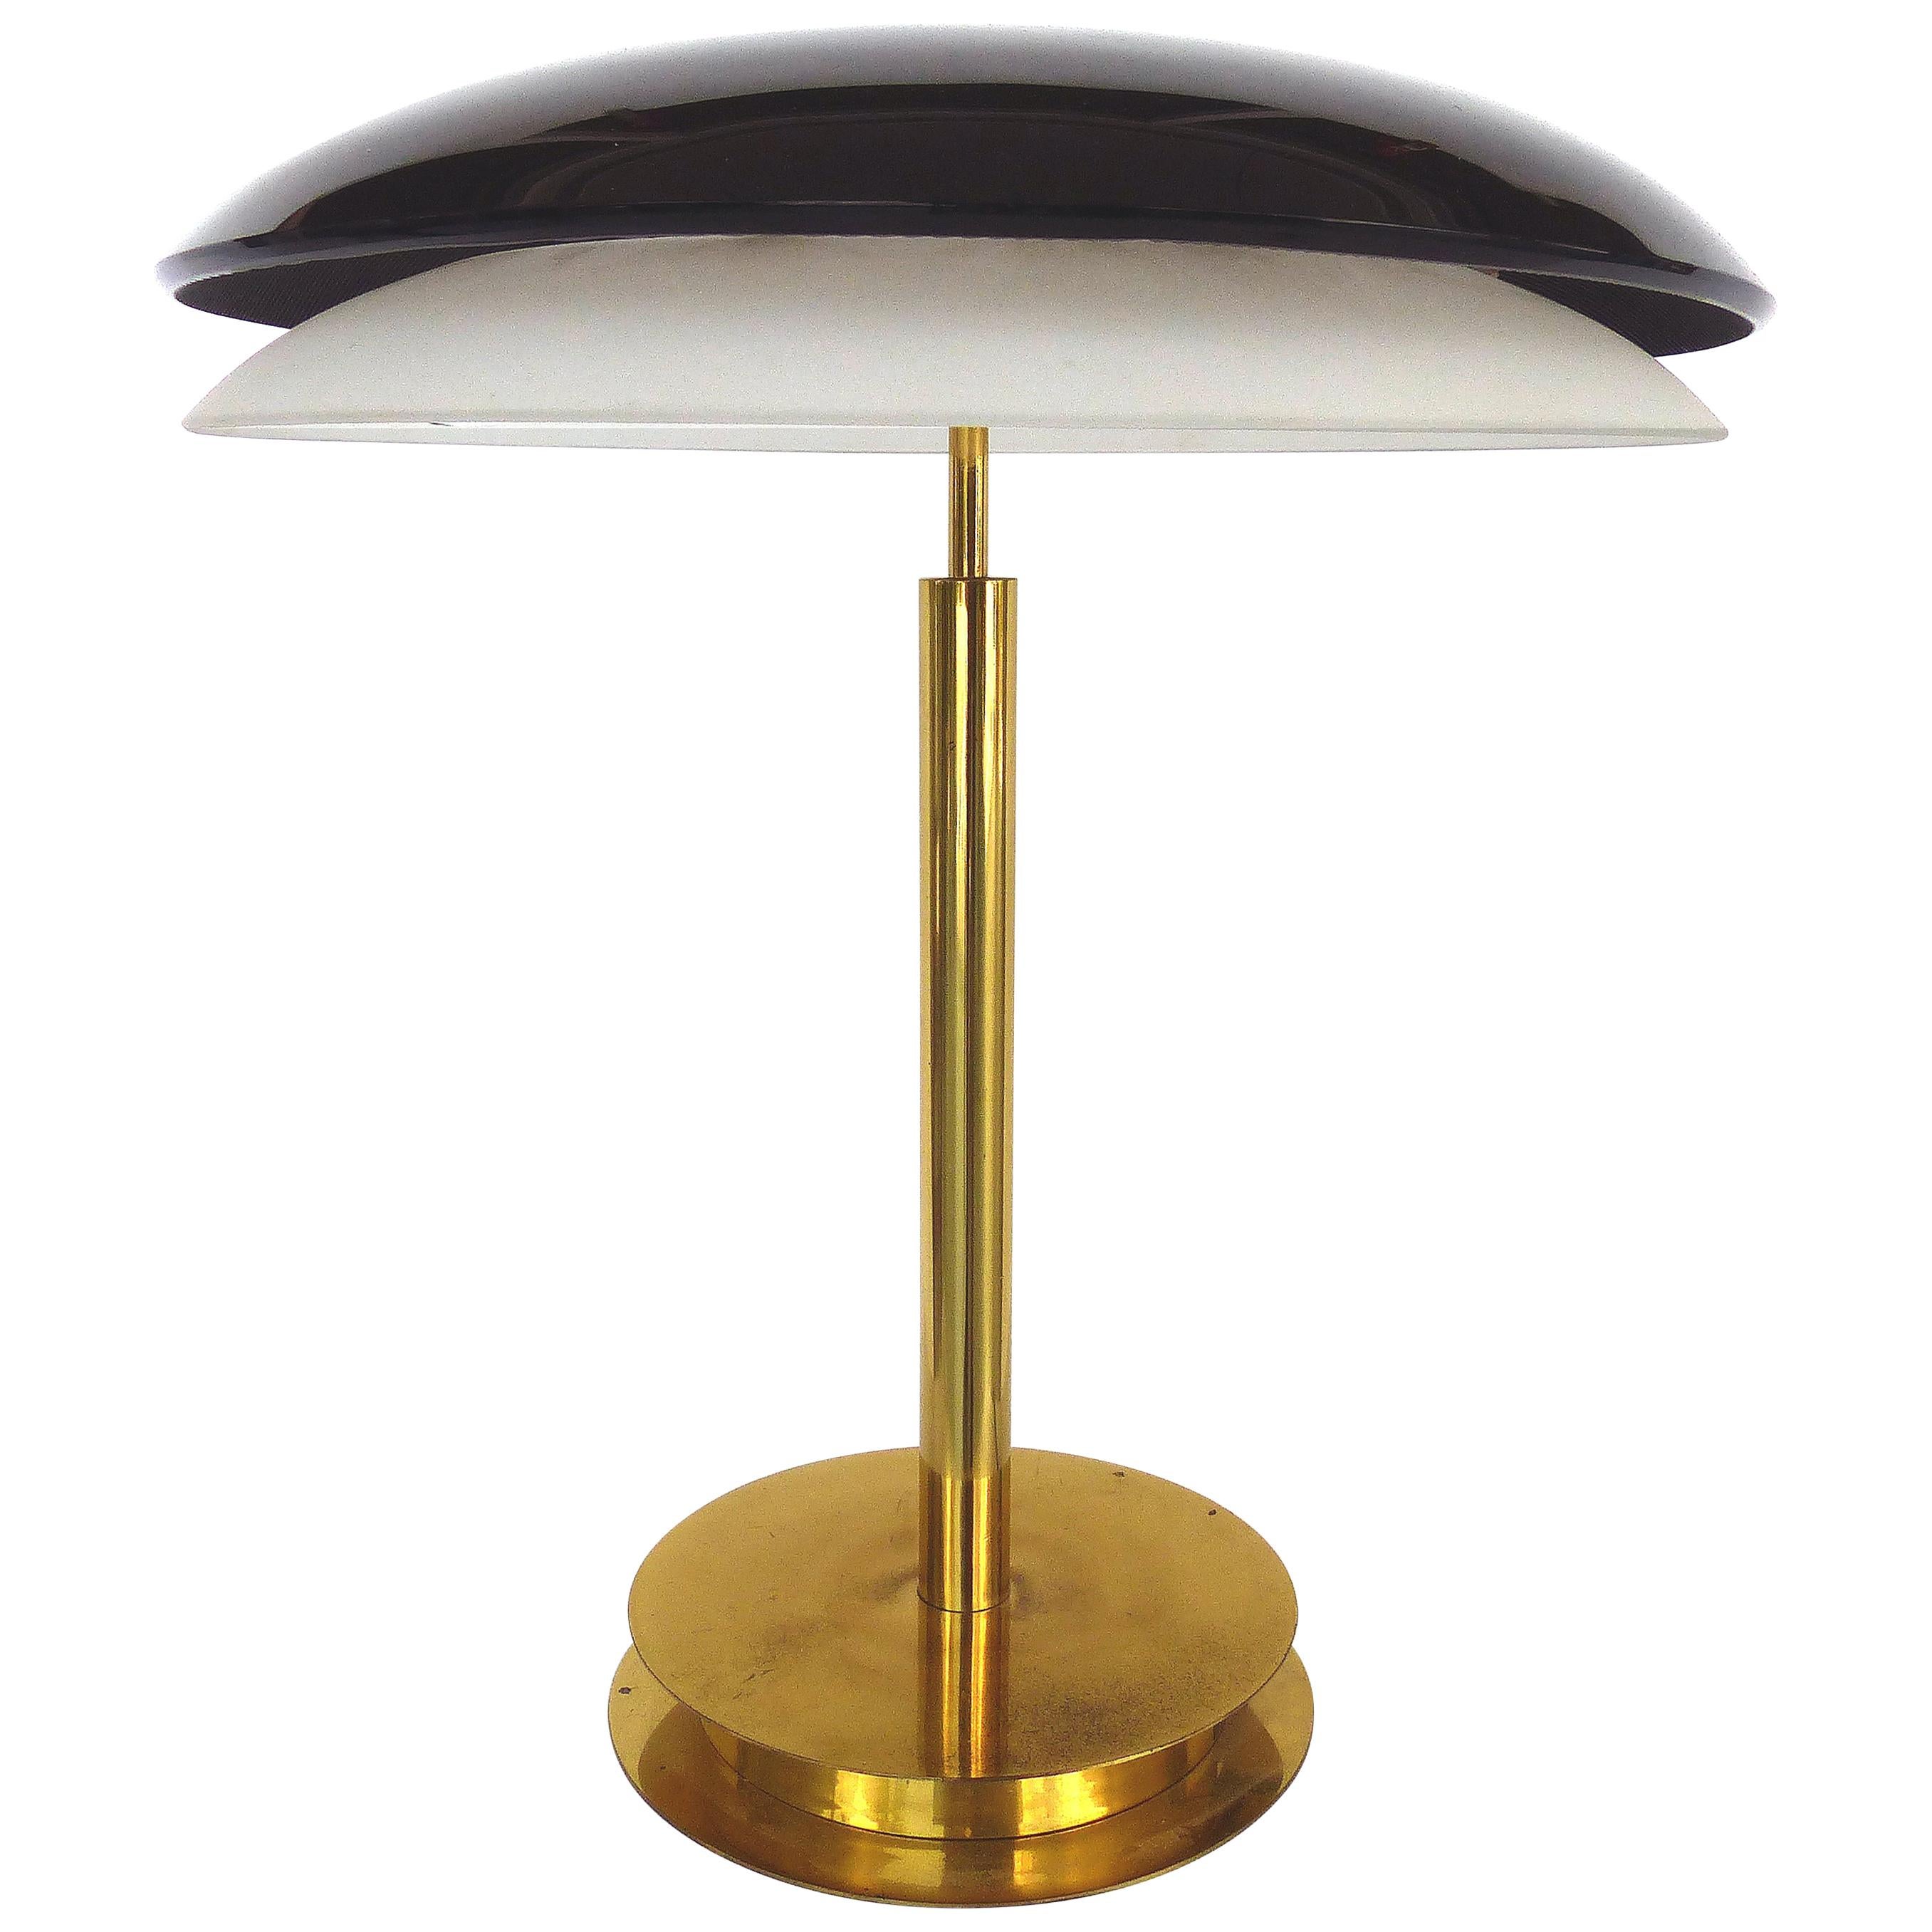 Pietro Chiesa Fontana Arte Bis/Tris Glass Table Lamp in Brass, Signed